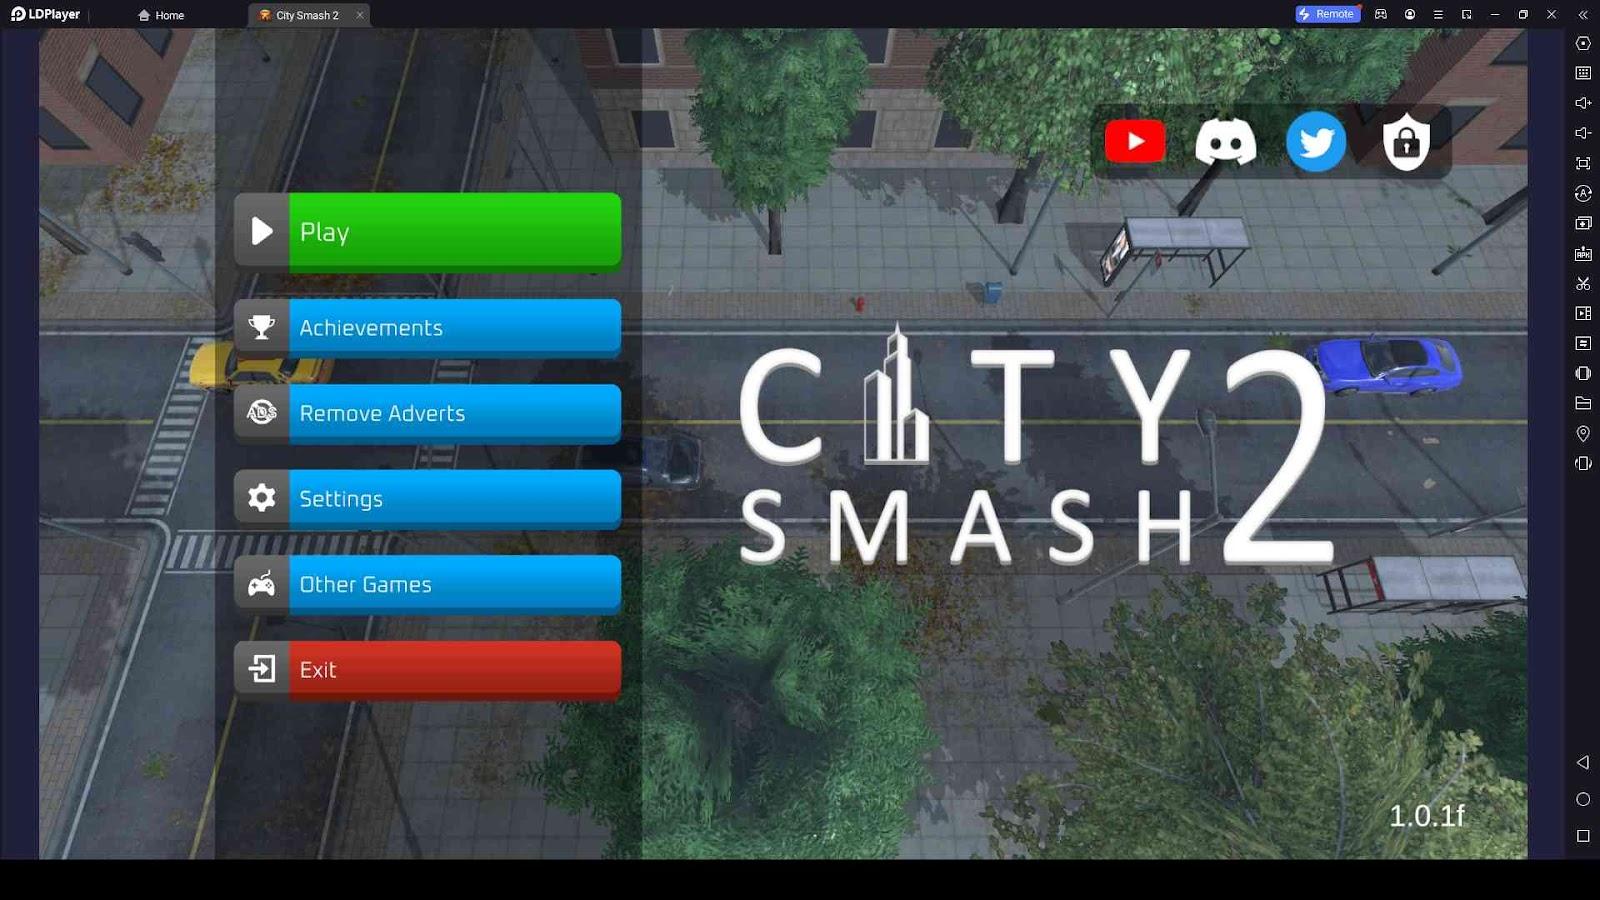 Unleash the Chaos with City Smash 2 Beginner Guide